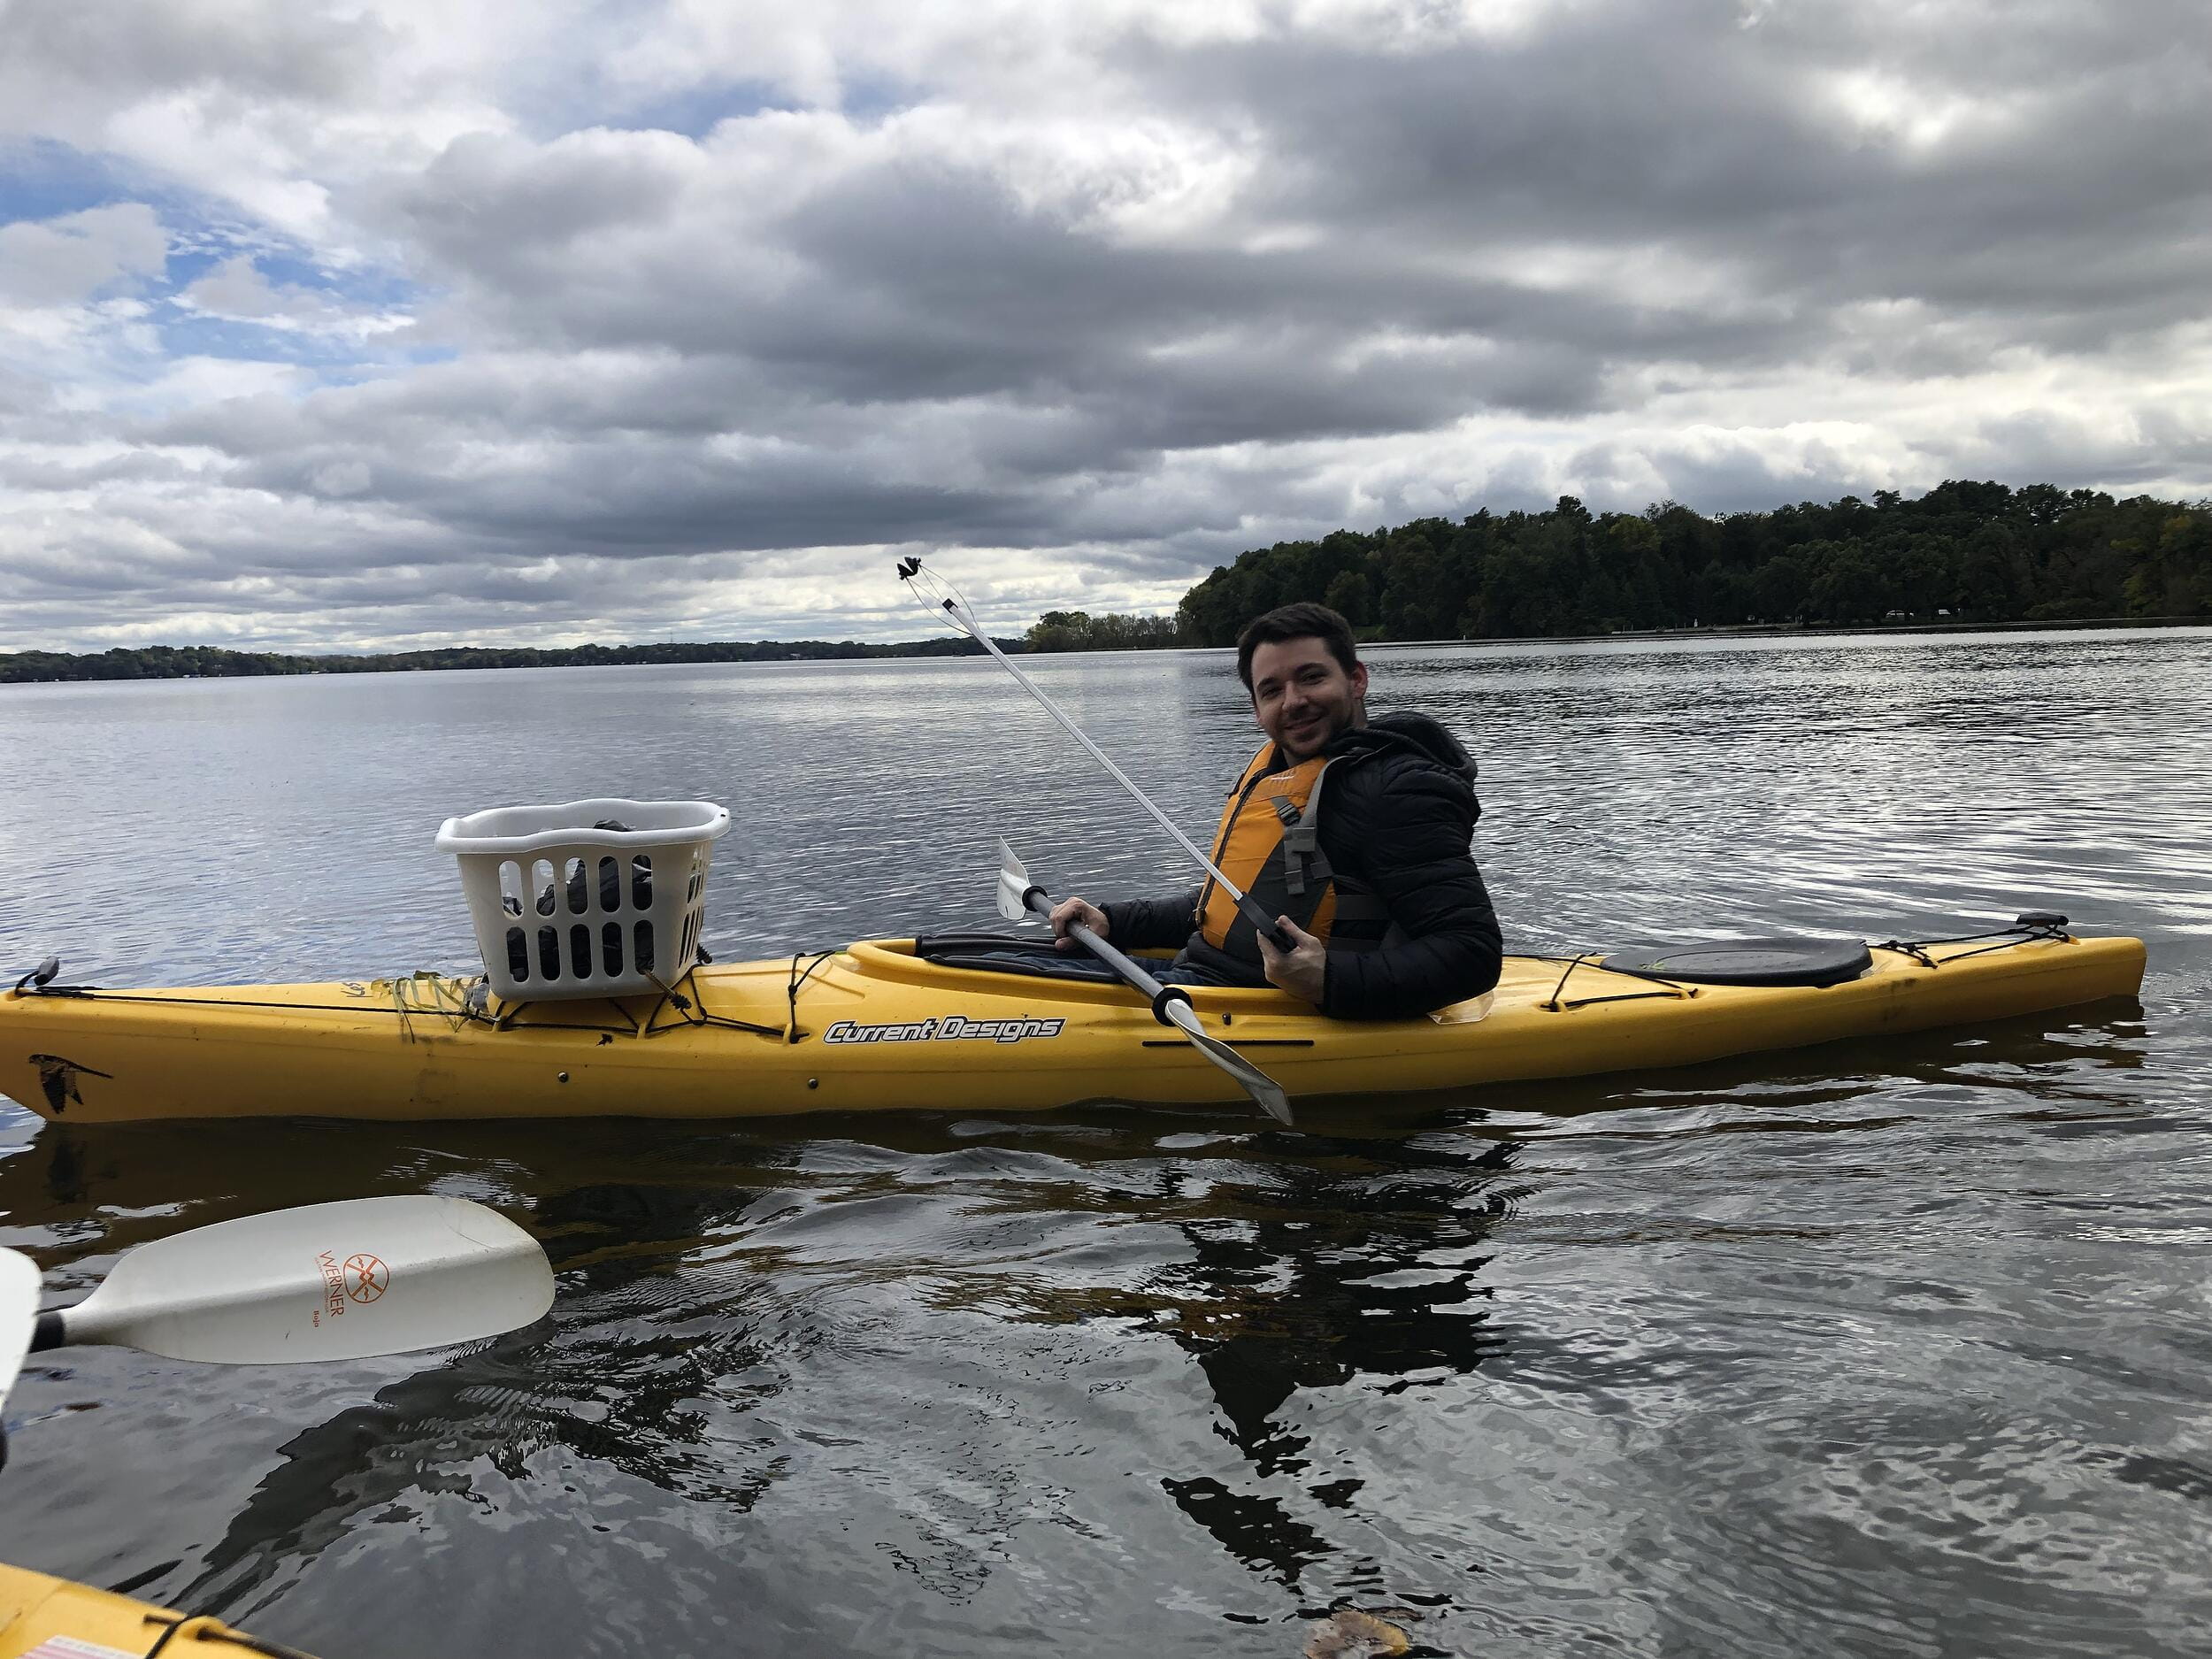 Kayak lake cleanup with Dane County Parks in Madison, WI.